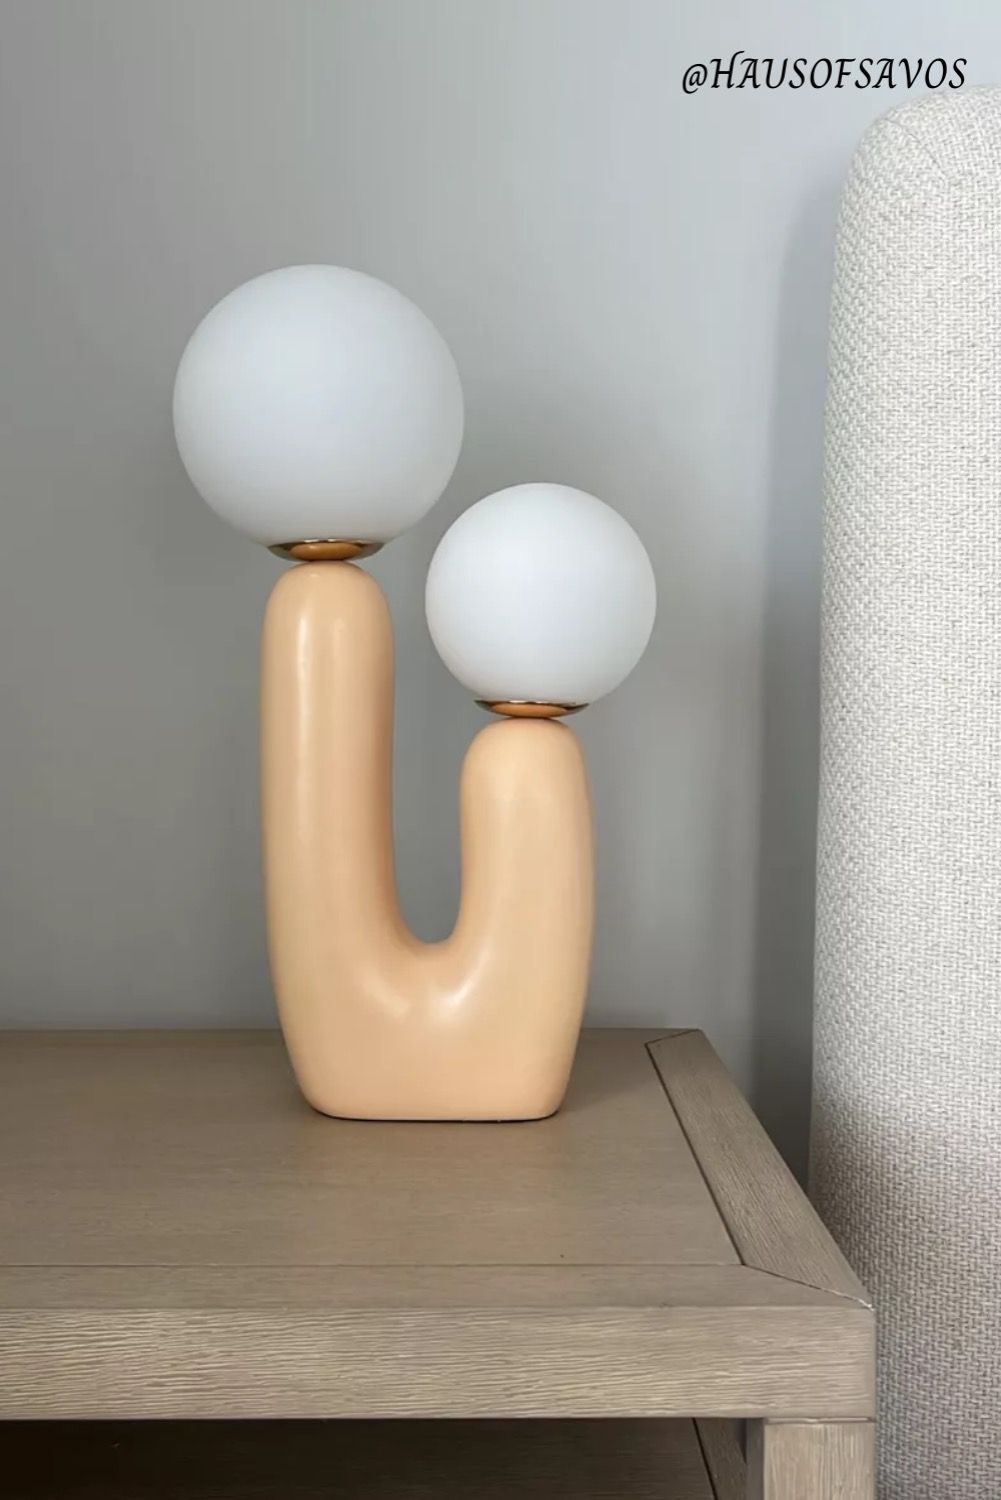 Funky Bedside Lamps : “Discover Funky Bedside Lamps Sure to Illuminate Your Space”